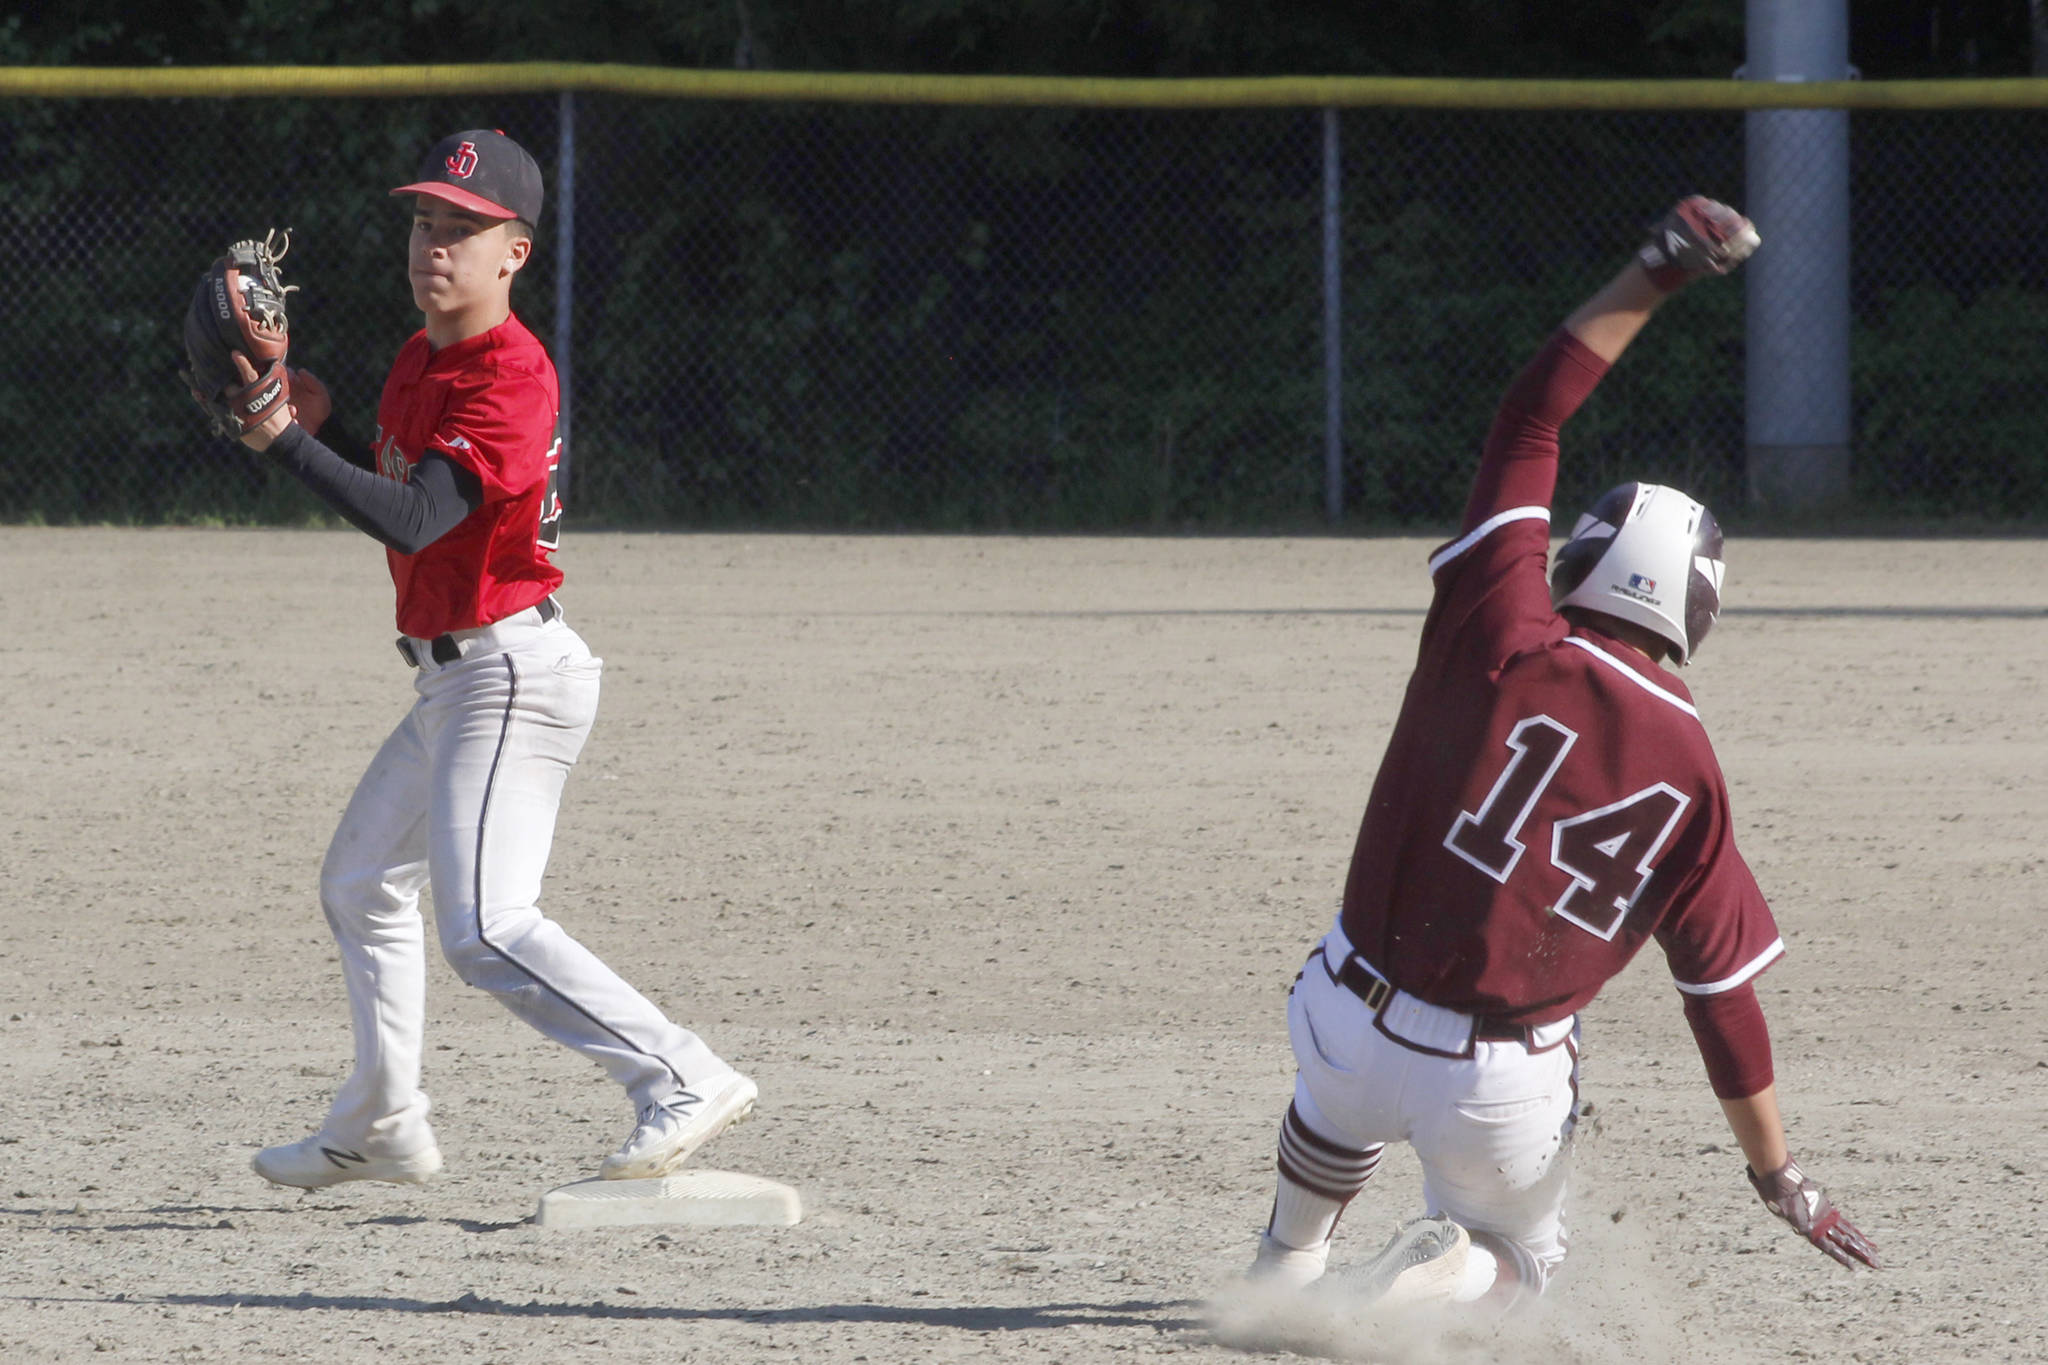 Juneau-Douglas High School: Yadaa.at Kale second baseman Gaby Soto forces out Ketchikan’s C.J. Paule during the Region V title game against Ketchikan on Saturday, May 25, 2019. (Alex McCarthy | Juneau Empire)